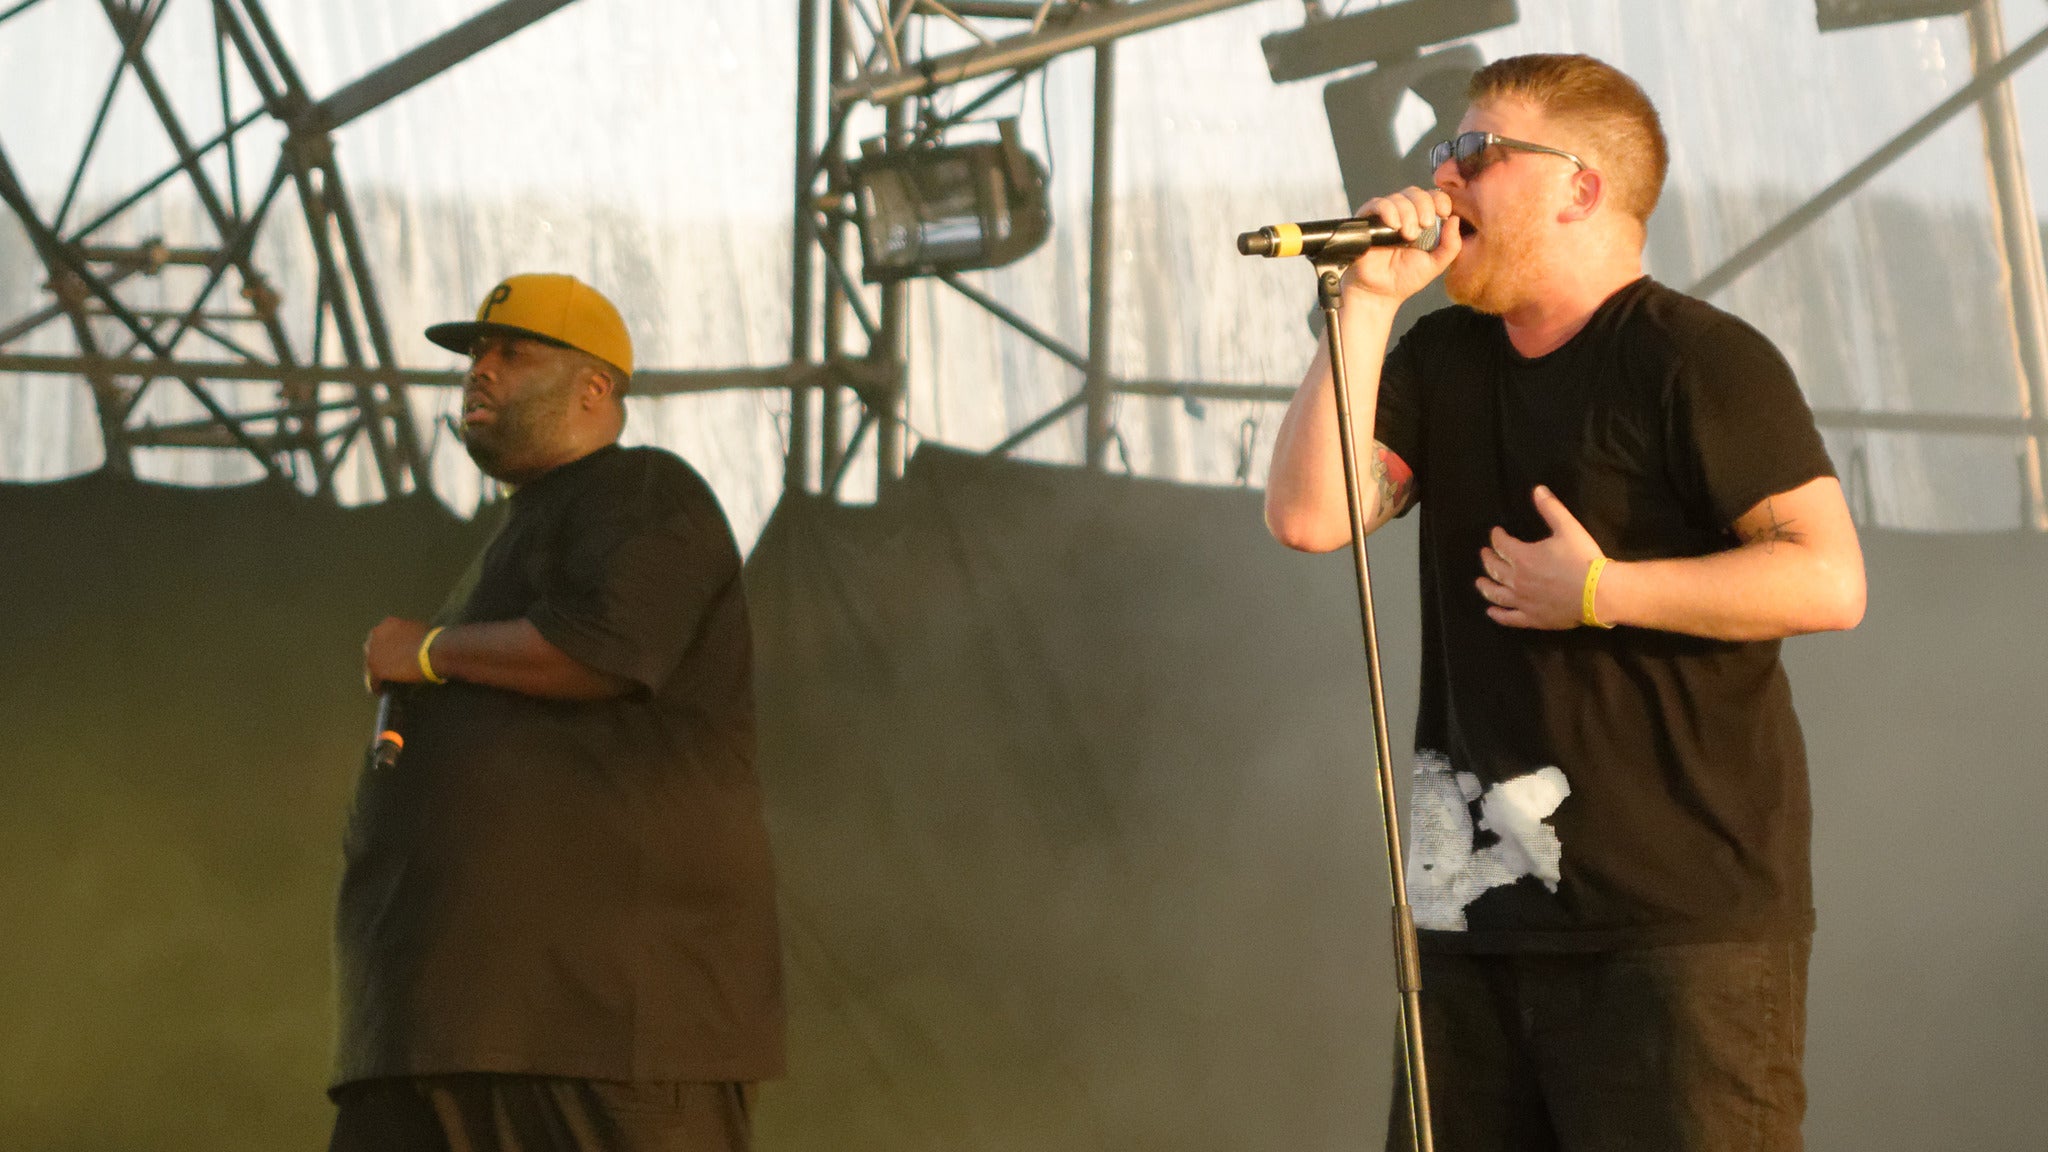 Adult Swim Festival Block Party Presents - Run The Jewels in Philadelphia promo photo for Live Nation presale offer code